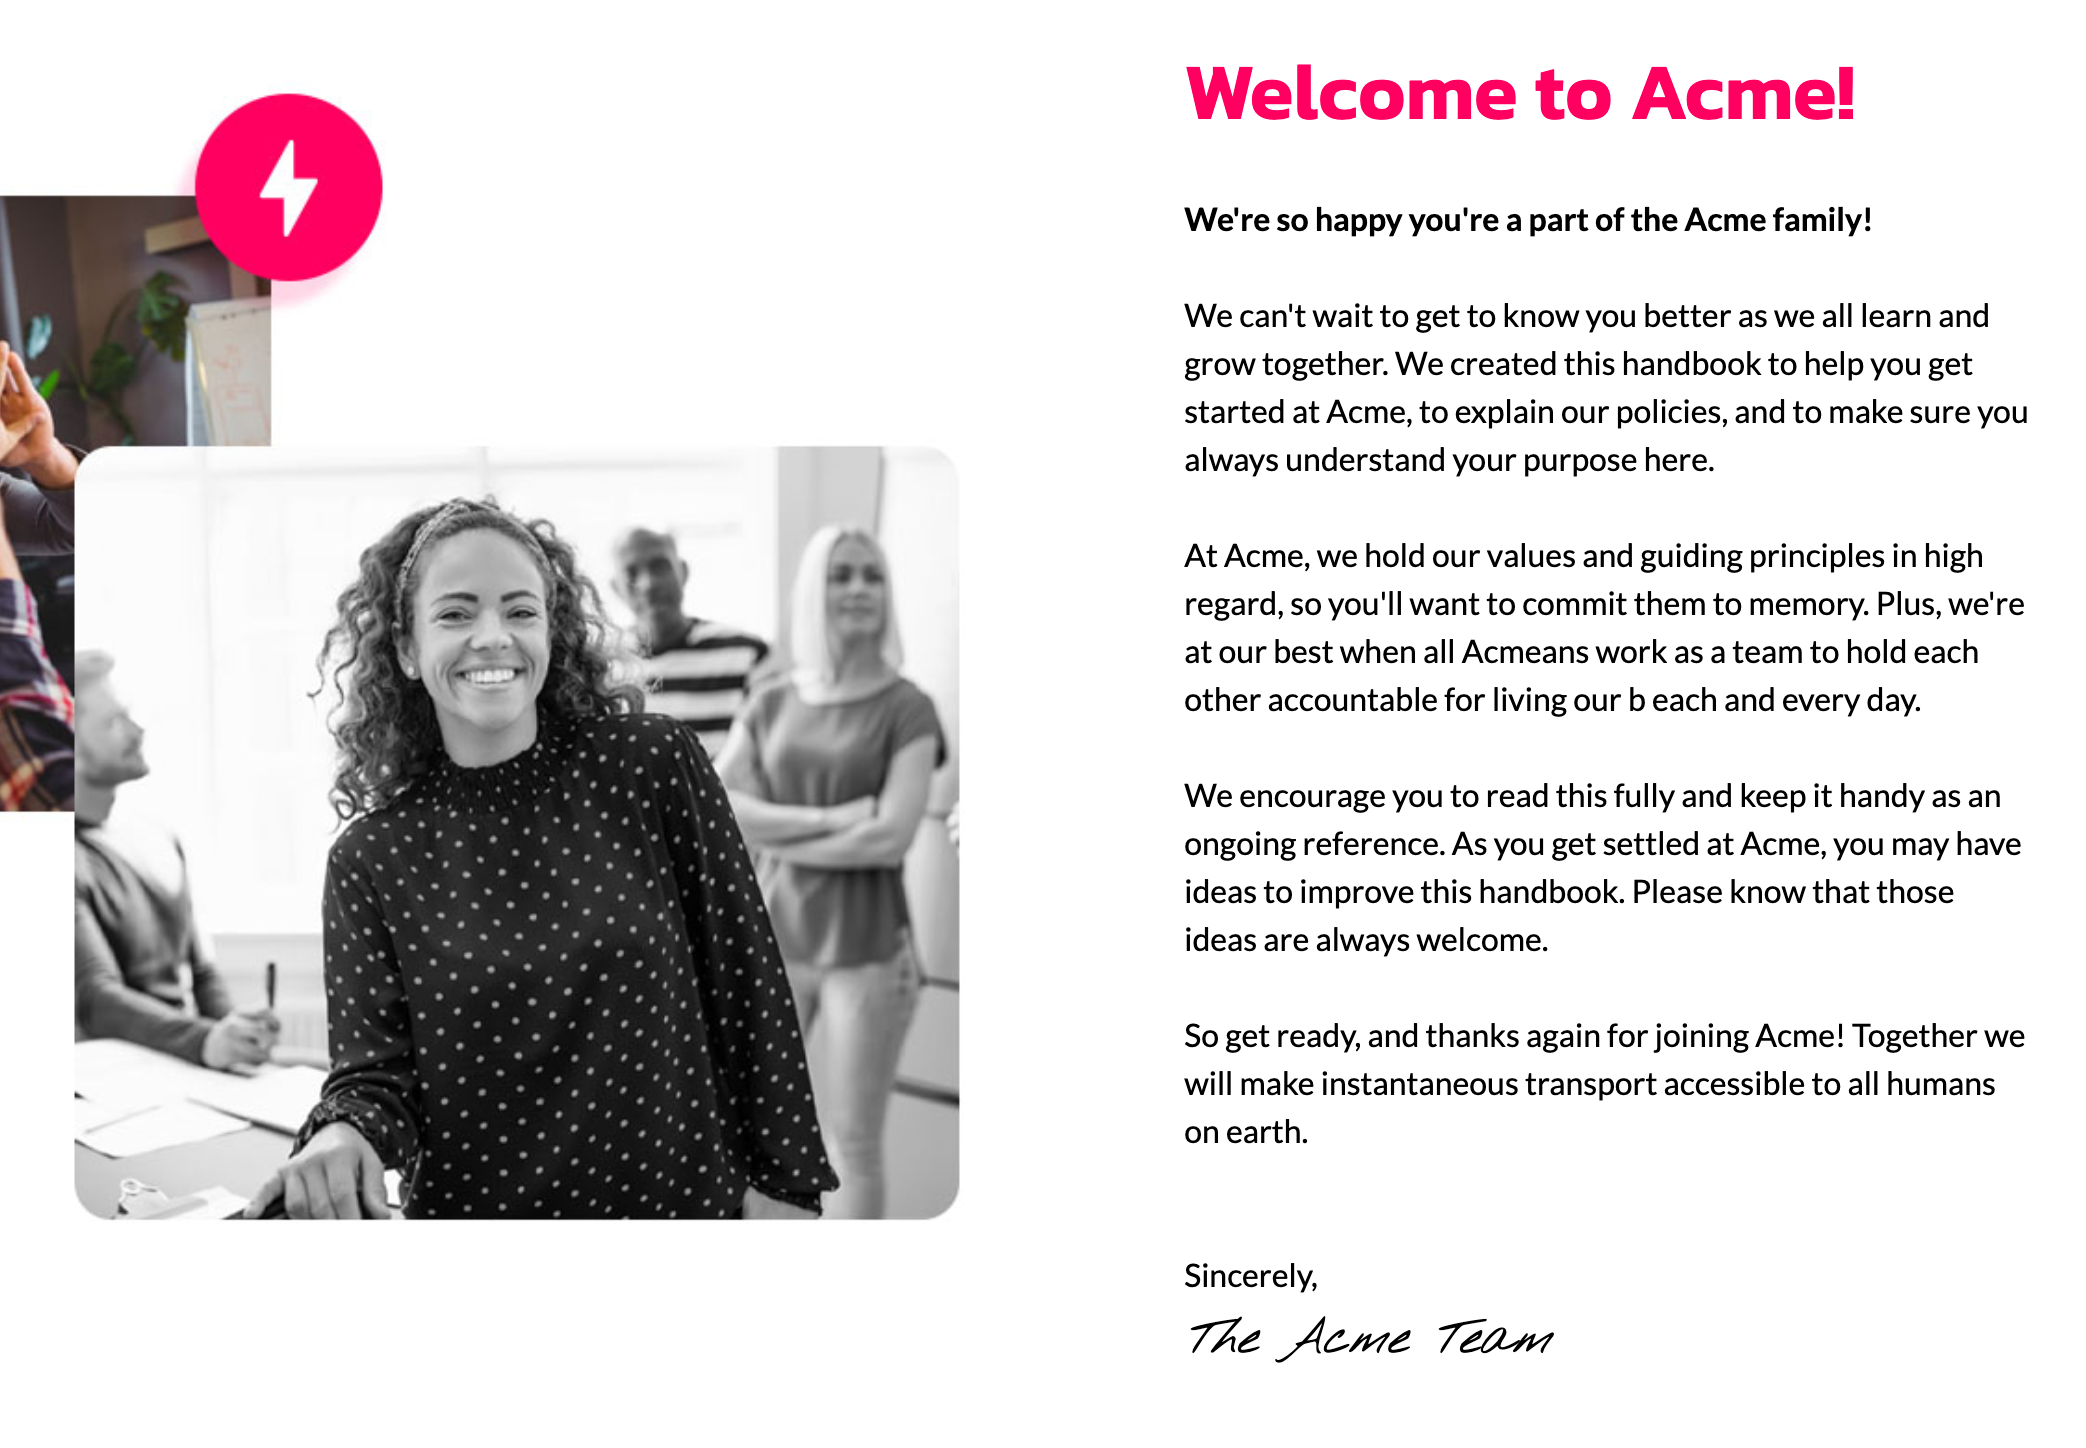 sample employee handbook welcome letter with bold title and inviting photos of employees